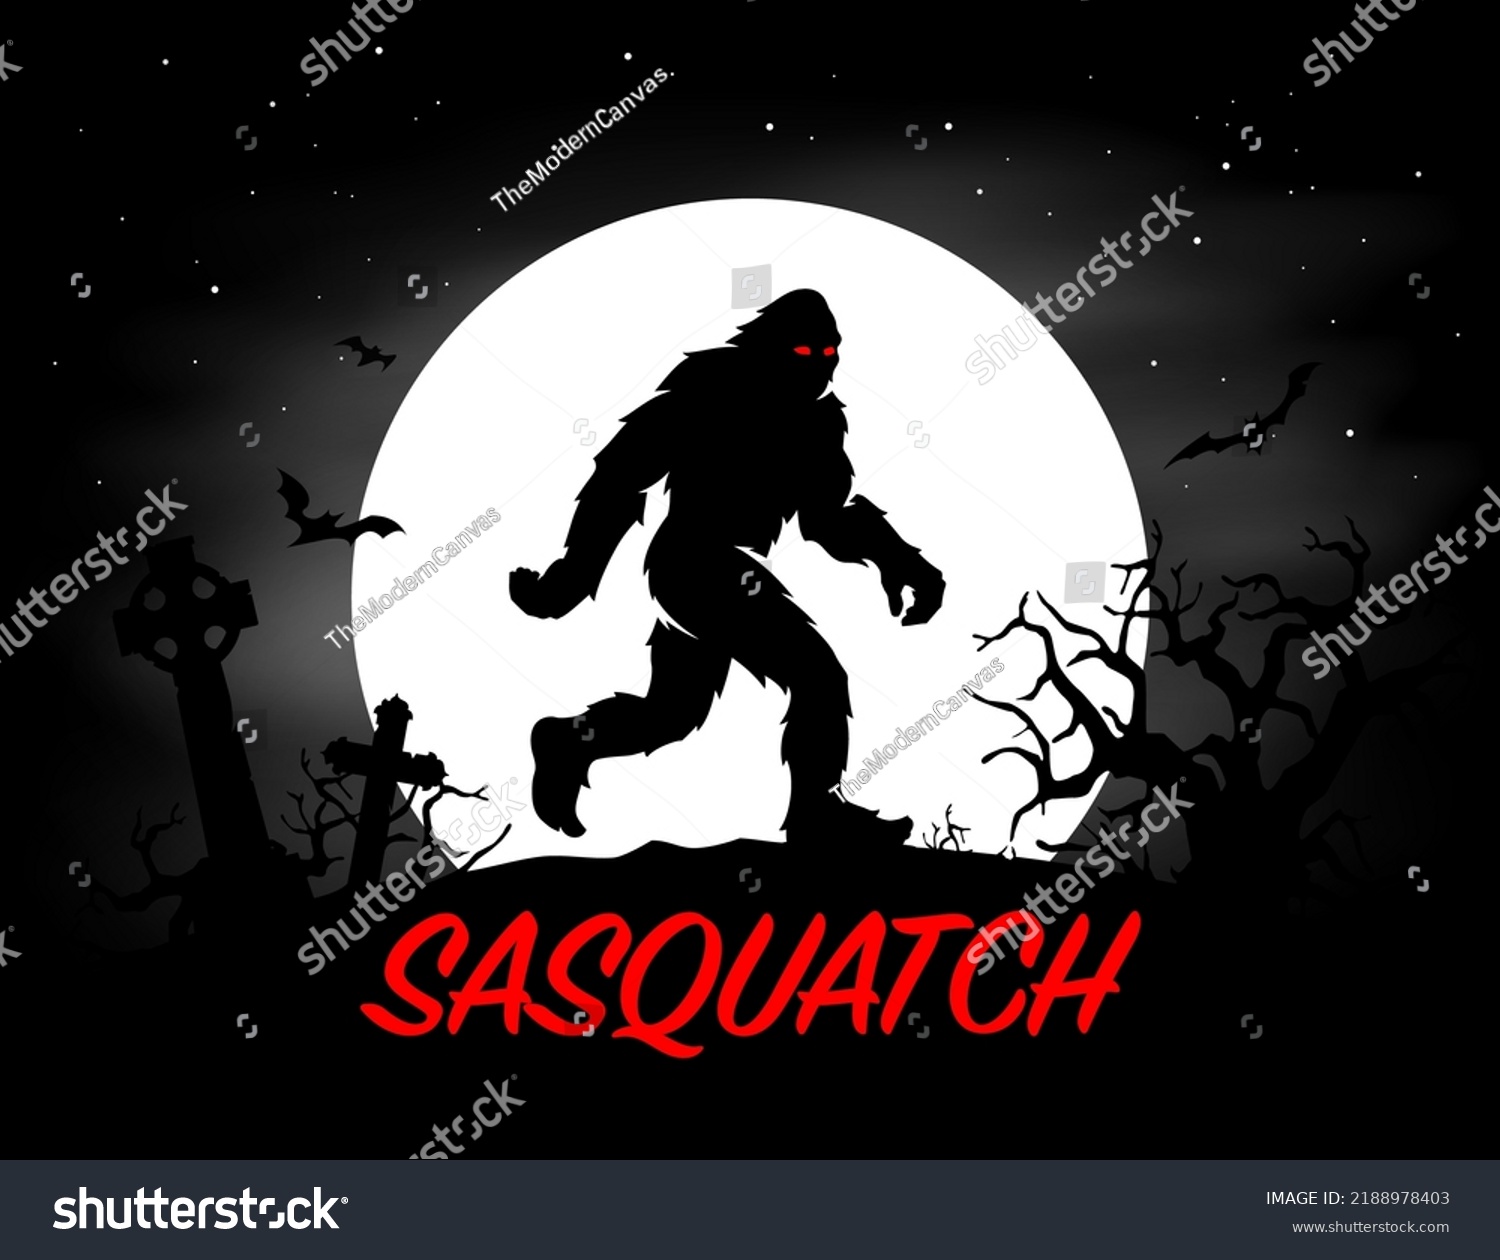 SVG of Sasquatch full moon halloween poster. Haunted cemetery bigfoot silhouette. Hairy cryptid creature graphic. Vector illustration. svg